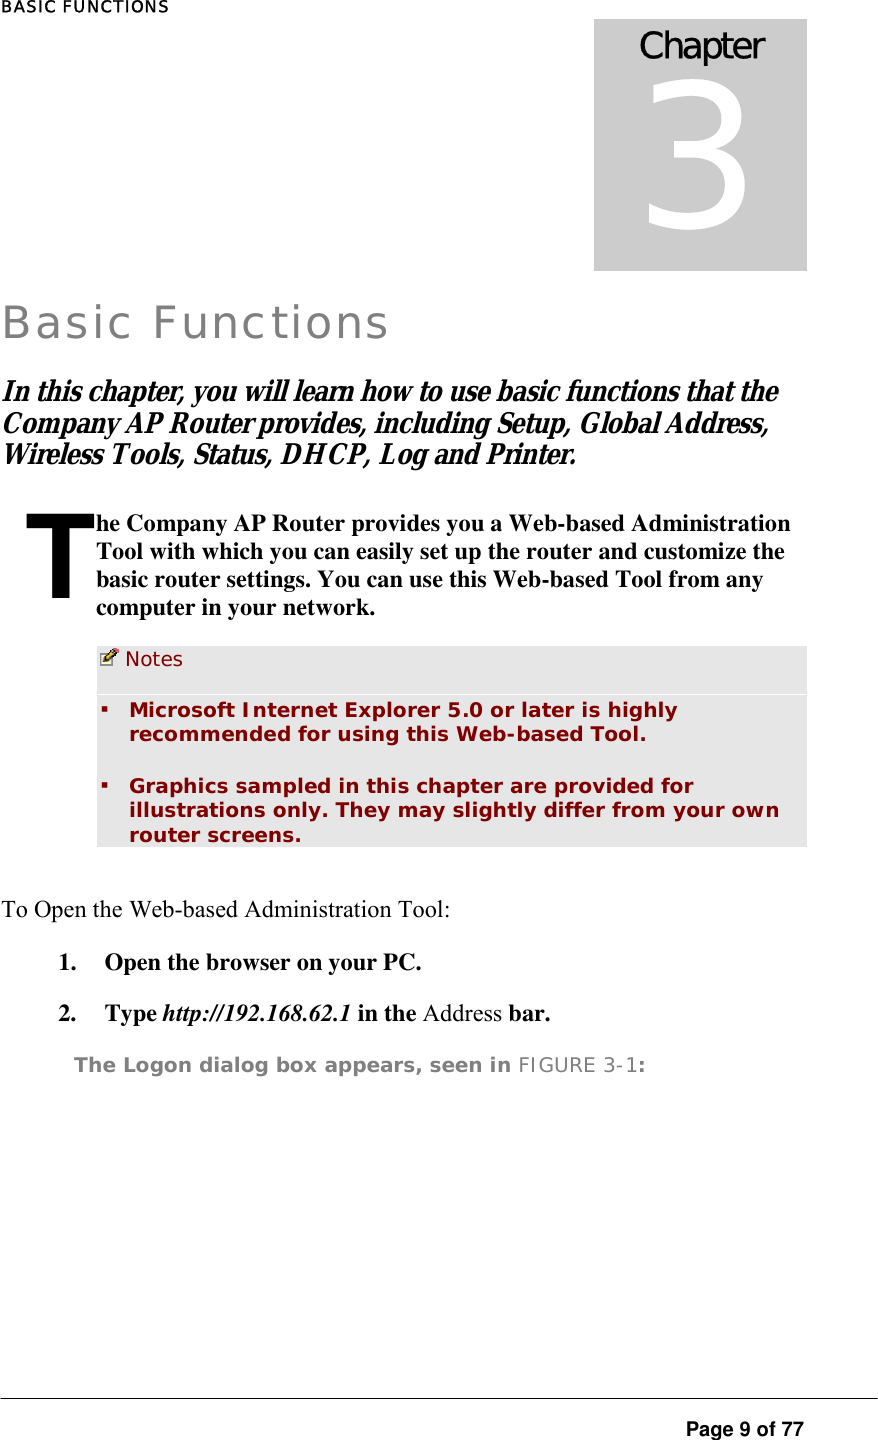 BASIC FUNCTIONS  Page 9 of 77 TBasic Functions In this chapter, you will learn how to use basic functions that the Company AP Router provides, including Setup, Global Address, Wireless Tools, Status, DHCP, Log and Printer.  he Company AP Router provides you a Web-based Administration Tool with which you can easily set up the router and customize the basic router settings. You can use this Web-based Tool from any computer in your network.   Notes  ▪ Microsoft Internet Explorer 5.0 or later is highly recommended for using this Web-based Tool.  ▪ Graphics sampled in this chapter are provided for illustrations only. They may slightly differ from your own router screens.  To Open the Web-based Administration Tool:  1.  Open the browser on your PC.  2. Type http://192.168.62.1 in the Address bar.  The Logon dialog box appears, seen in FIGURE 3-1:  Chapter 3 